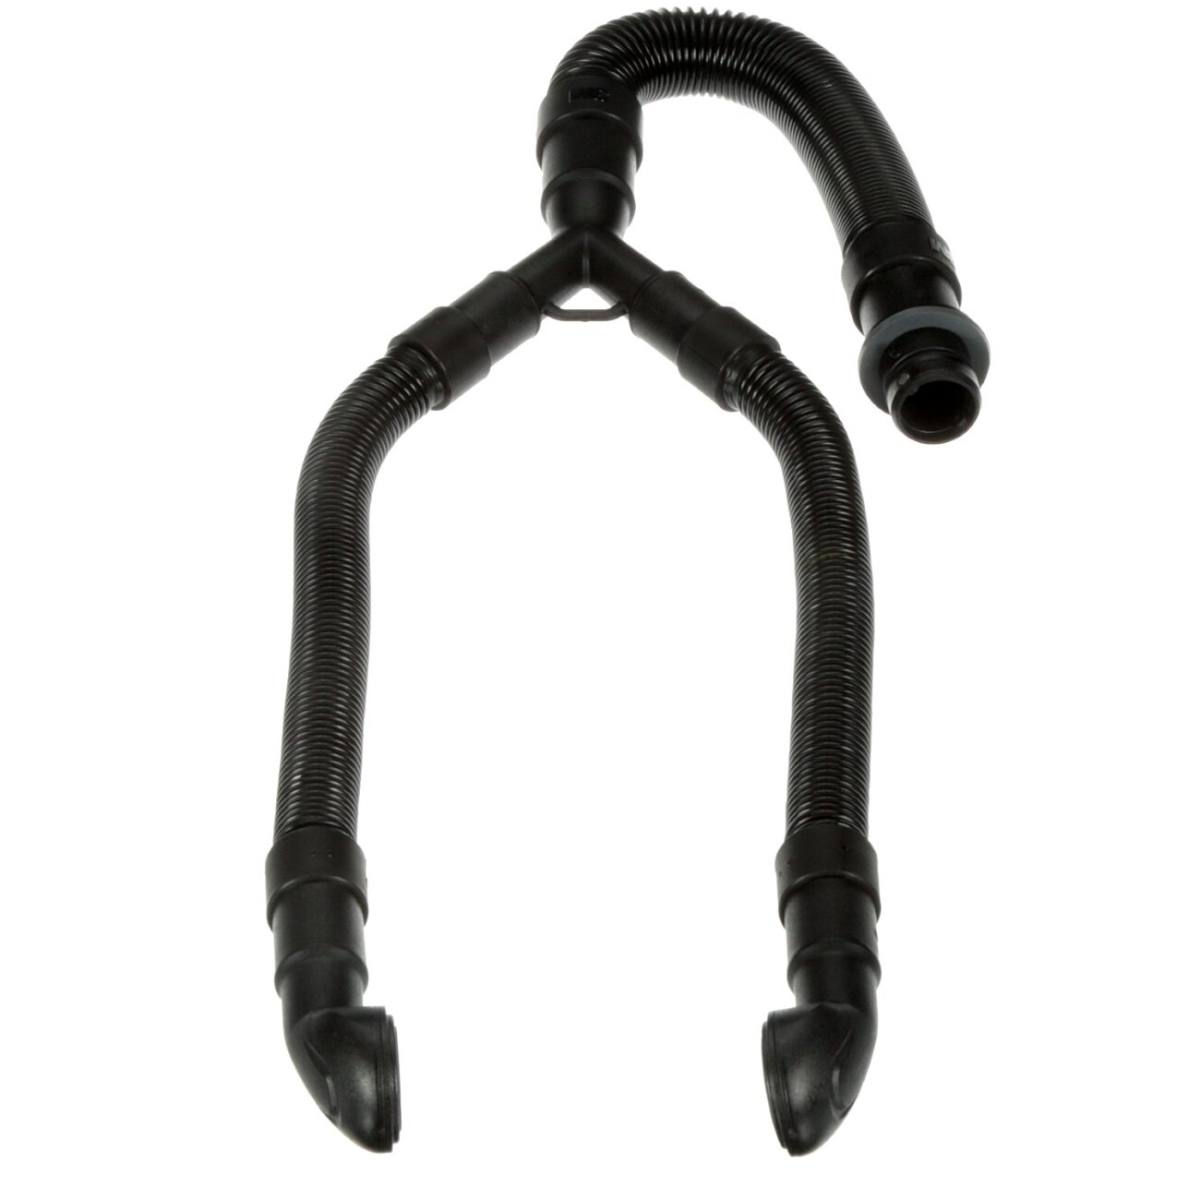 3M Versaflo BT-63 air hose, for tight-fitting breathing connections (half and full face masks), lightweight design, adjustable in length